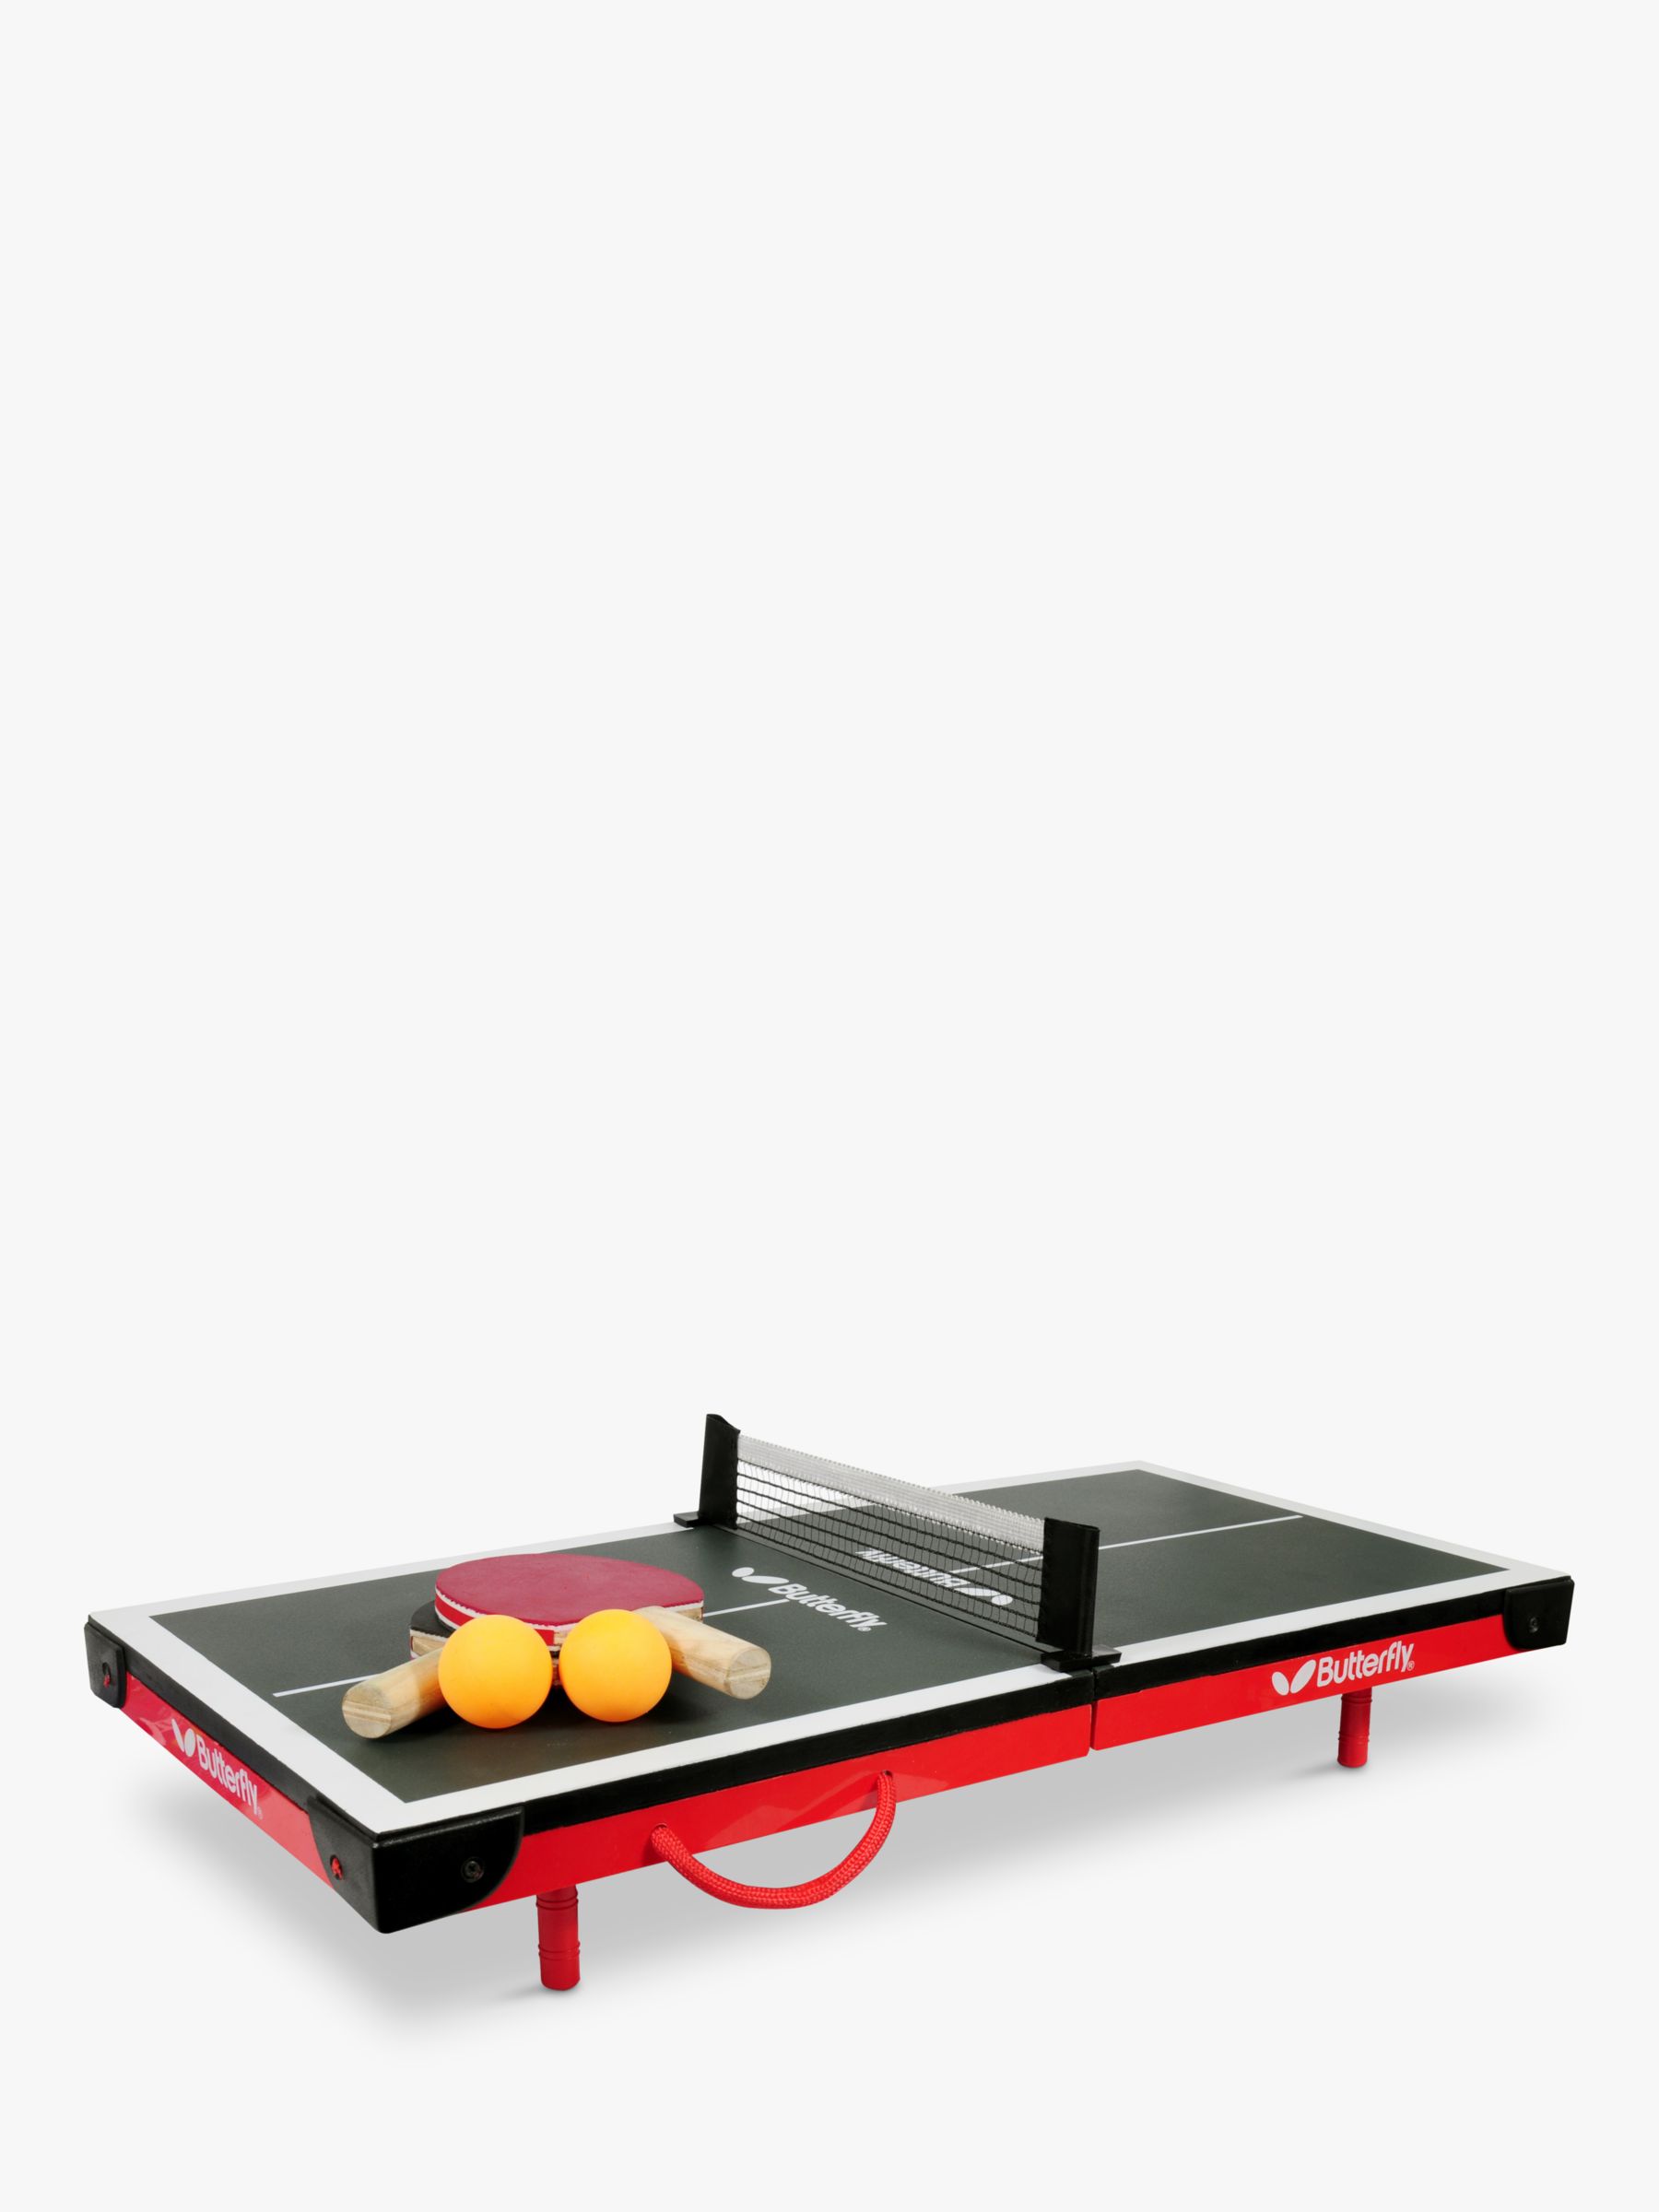 Butterfly Mini Table Tennis Table, £49.99